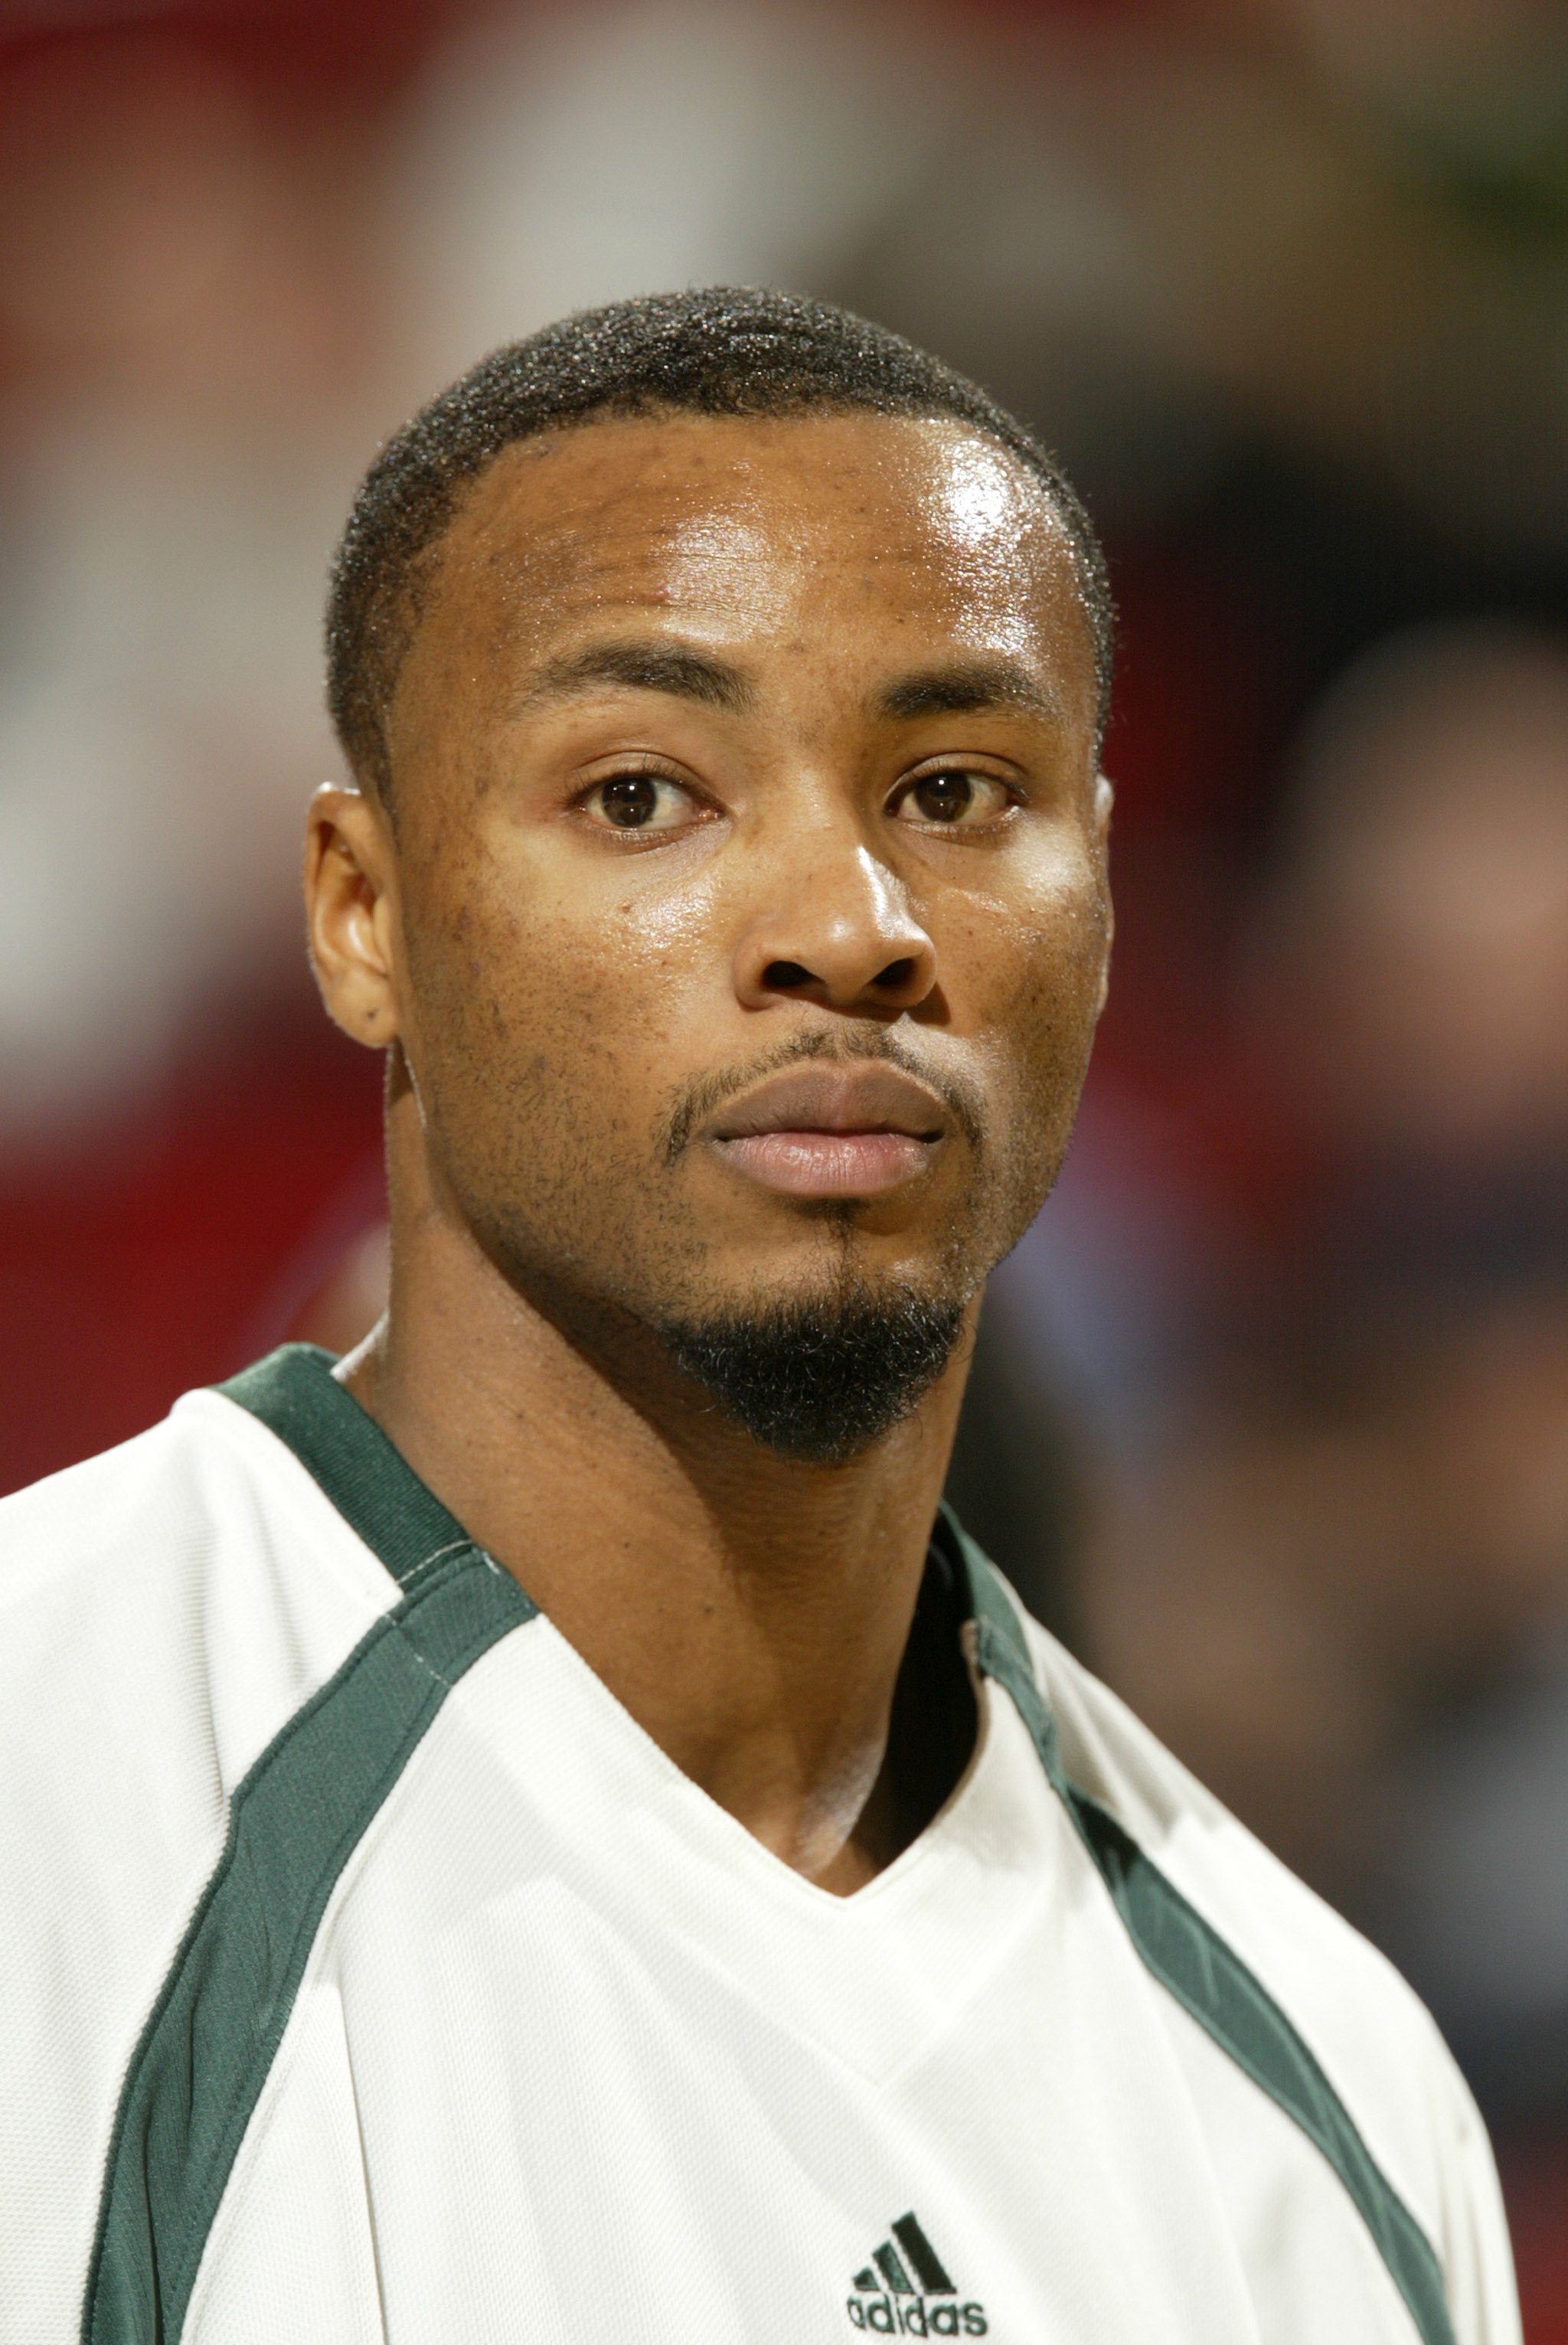 SEATTLE - NOVEMBER 17:  Rashard Lewis #7 of the Seattle Sonics warms-up for the game against the Utah Jazz on November 17, 2006 at Key Arena in Seattle, Washington. The Jazz won 118-109. NOTE TO USER: User expressly acknowledges and agrees that, by downlo